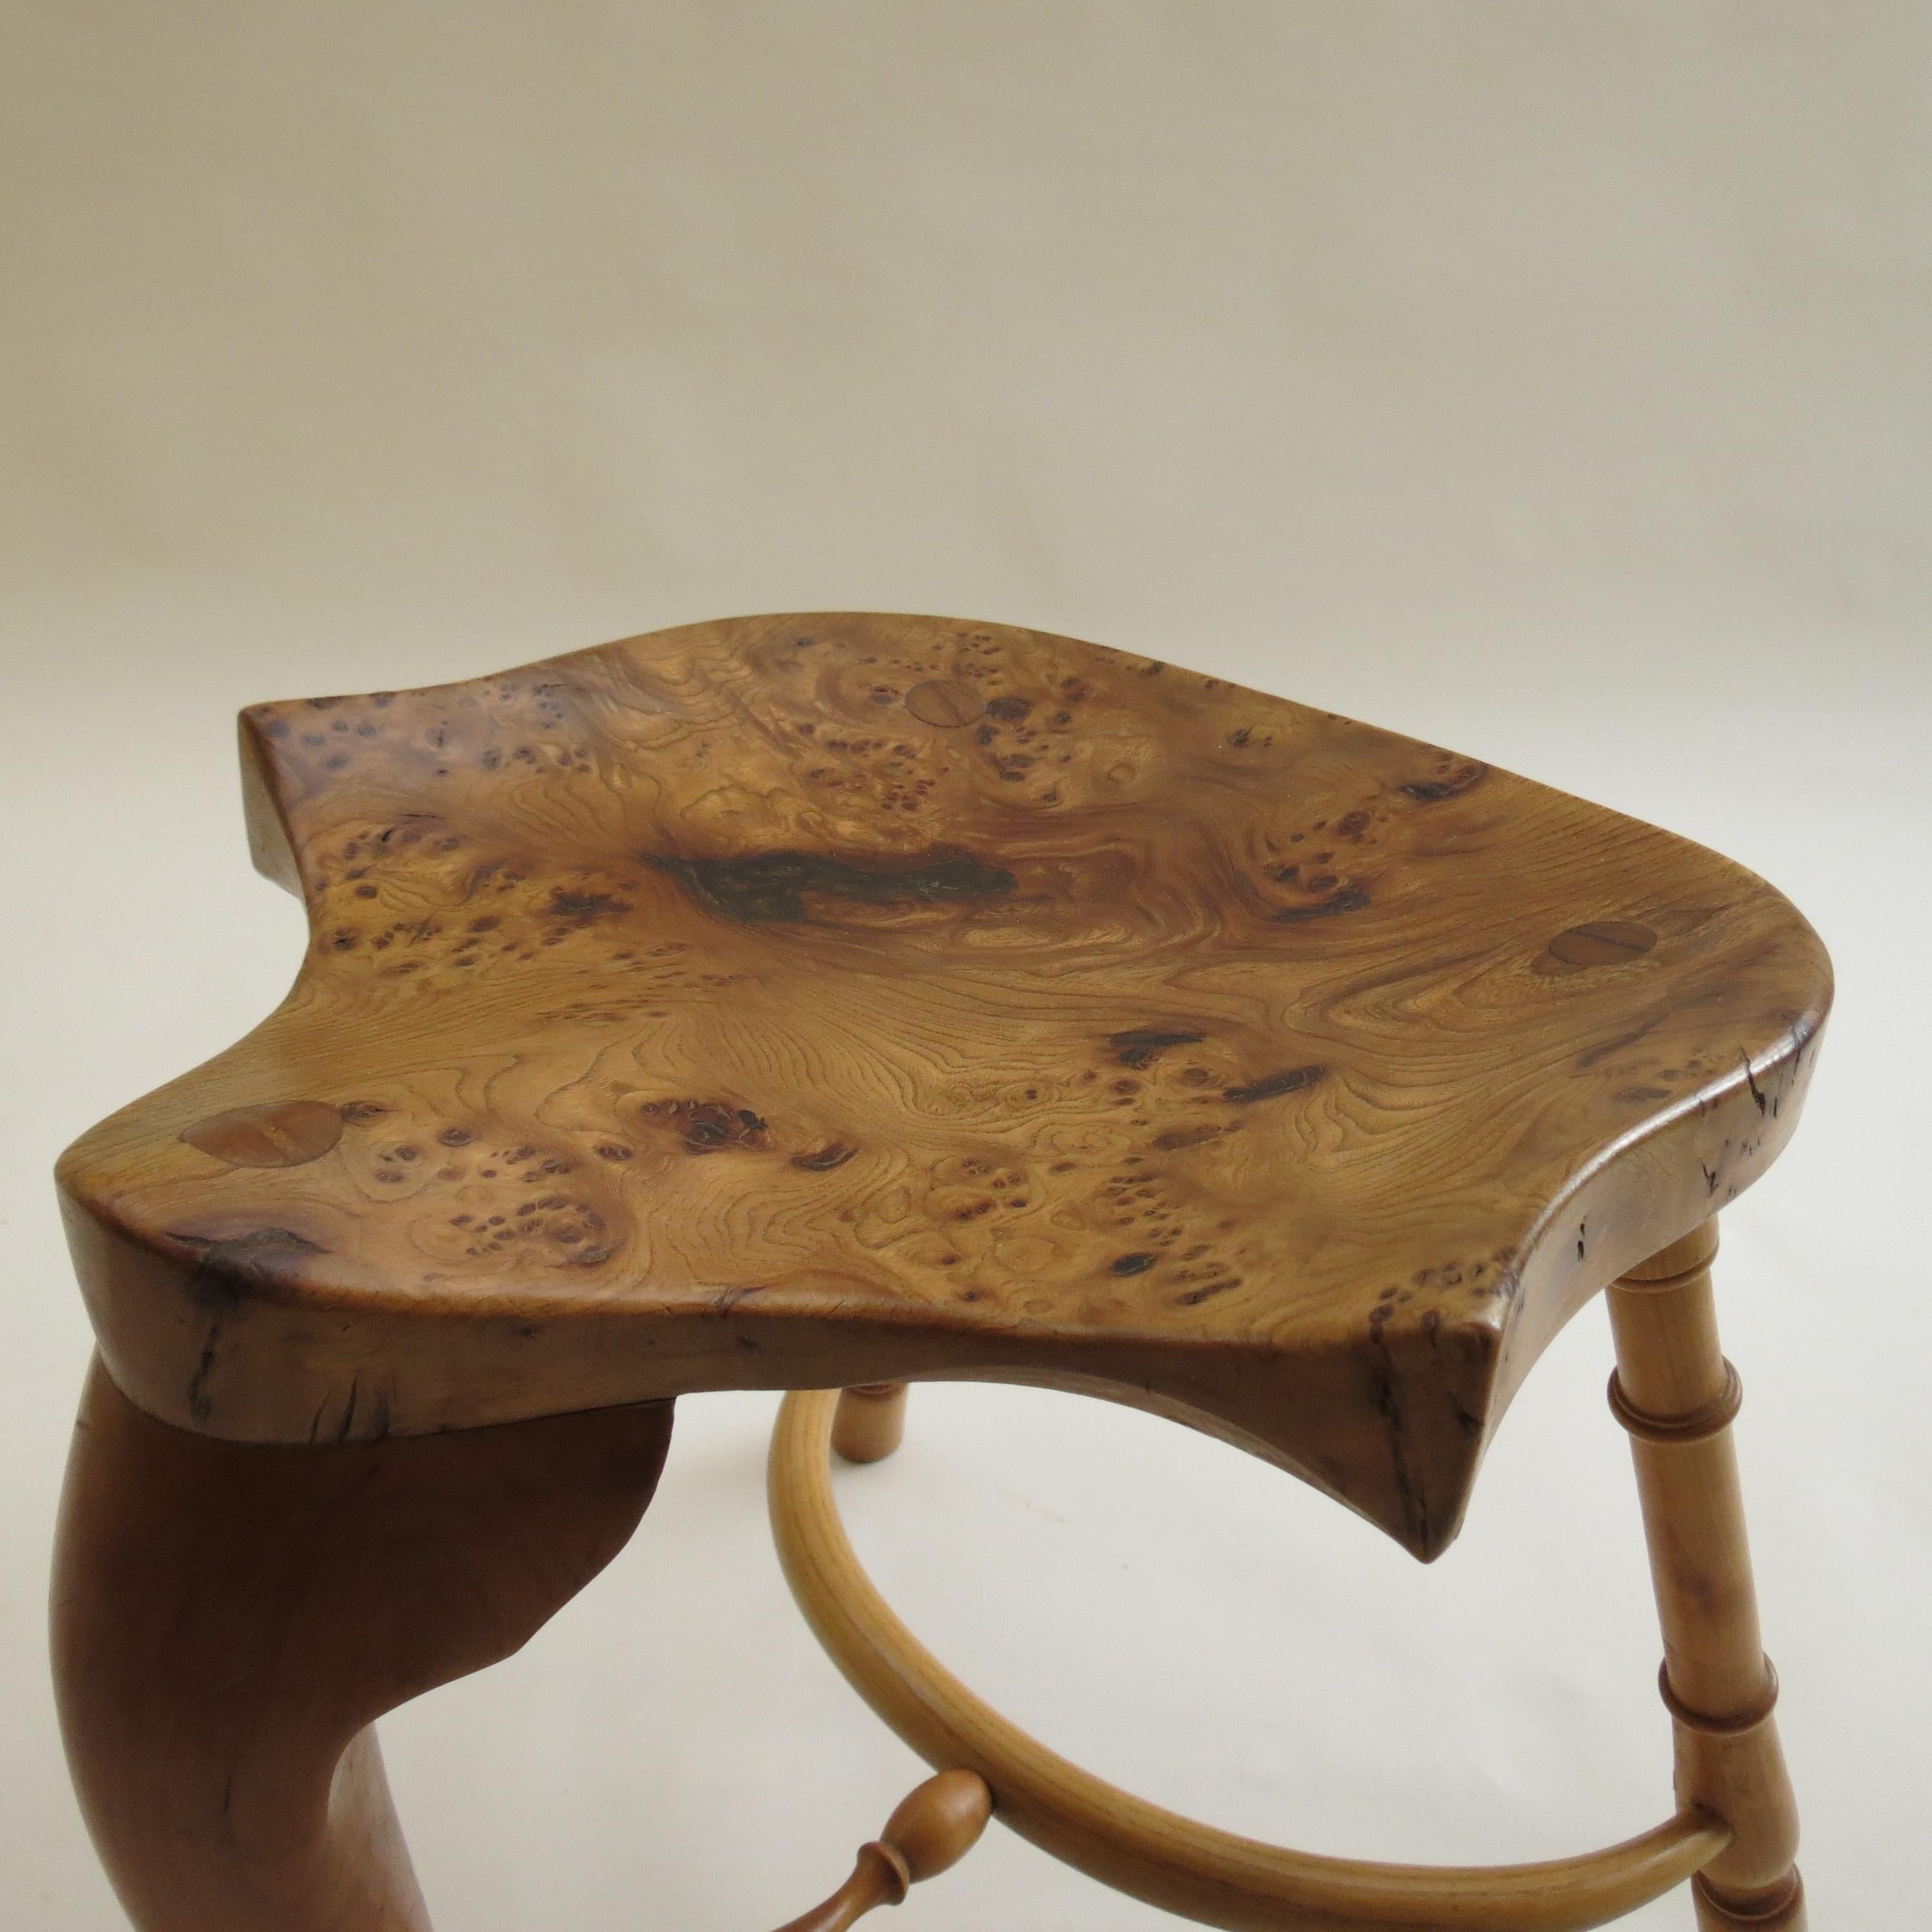 Wonderful, good quality hand produced bespoke stool by Stewart Linford. These date from the 1990s. The stool's wonderfully sculptural seat is made from solid Burr Ash with good figurative detail to the grain, with turned legs made from solid Cherry